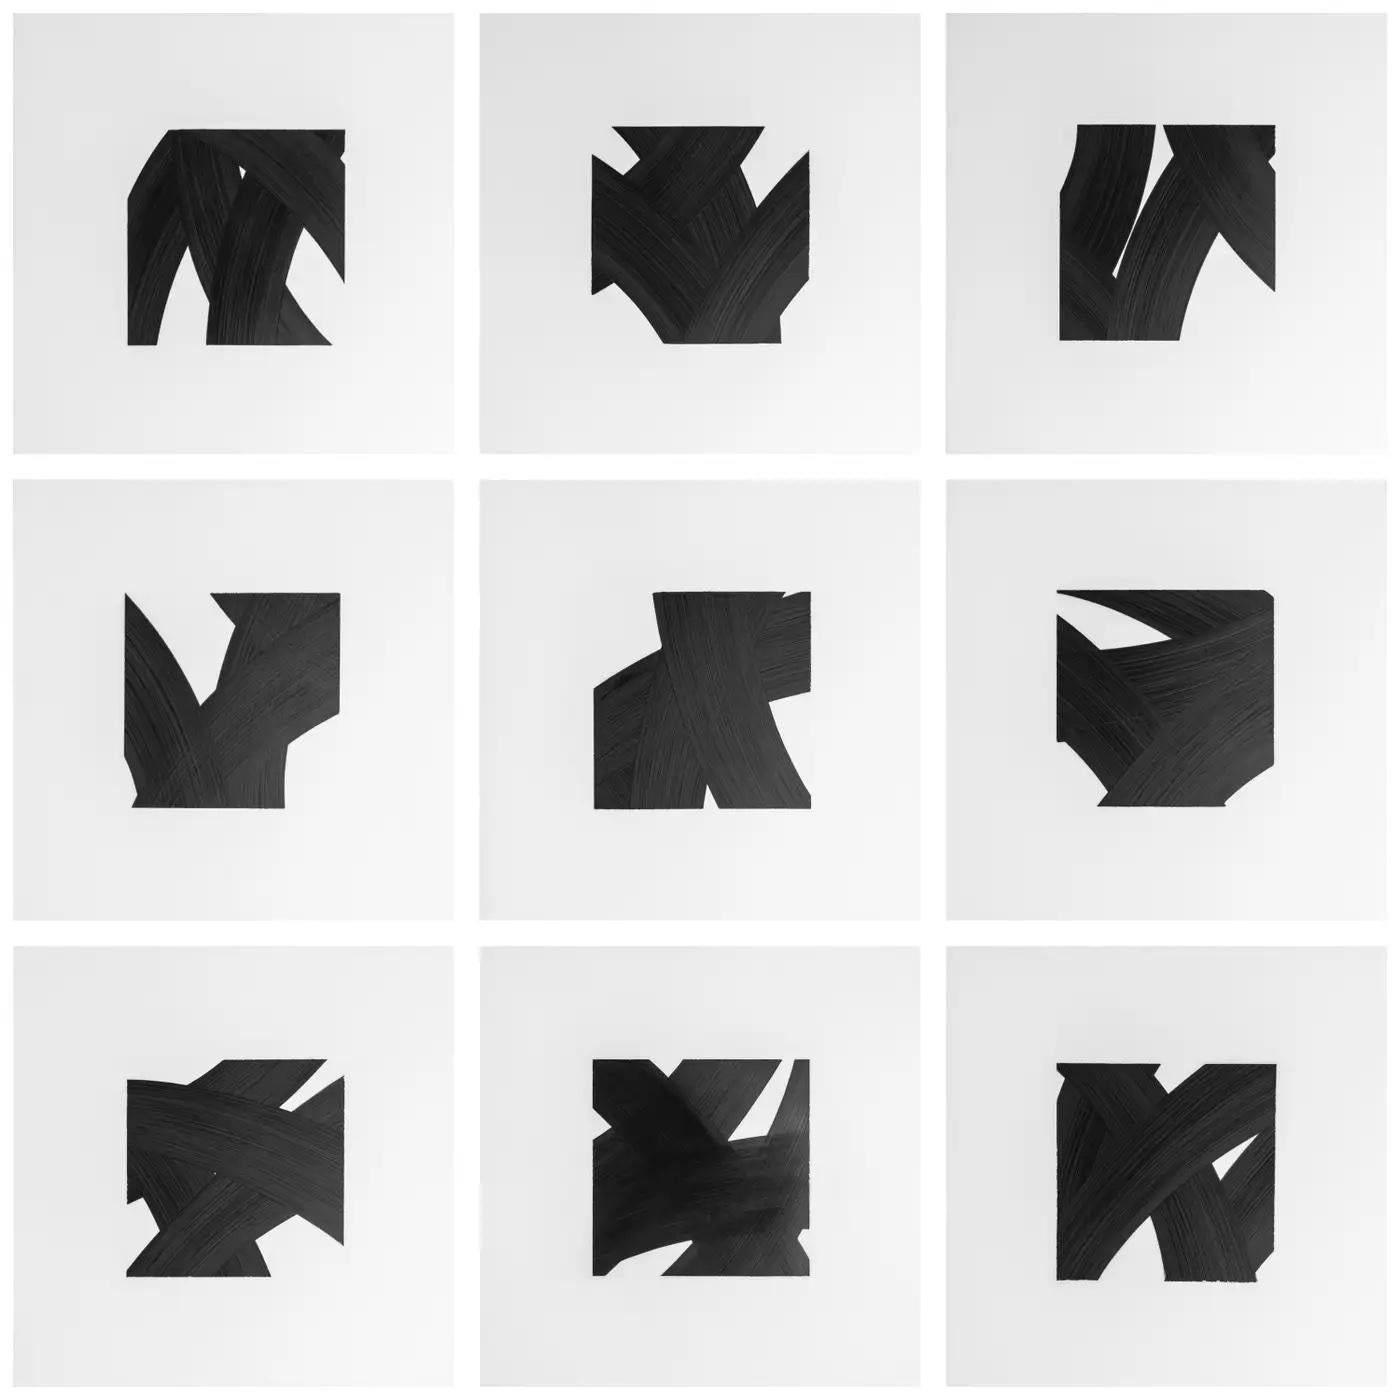 Contemporary New York artist Patrick Carrara's Black Ink on Mylar Drawings were created in 2016 - 2017. This is his latest series Appearance, which he started ten years ago and also progresses by number. He uses black ink on Mylar, layering over and